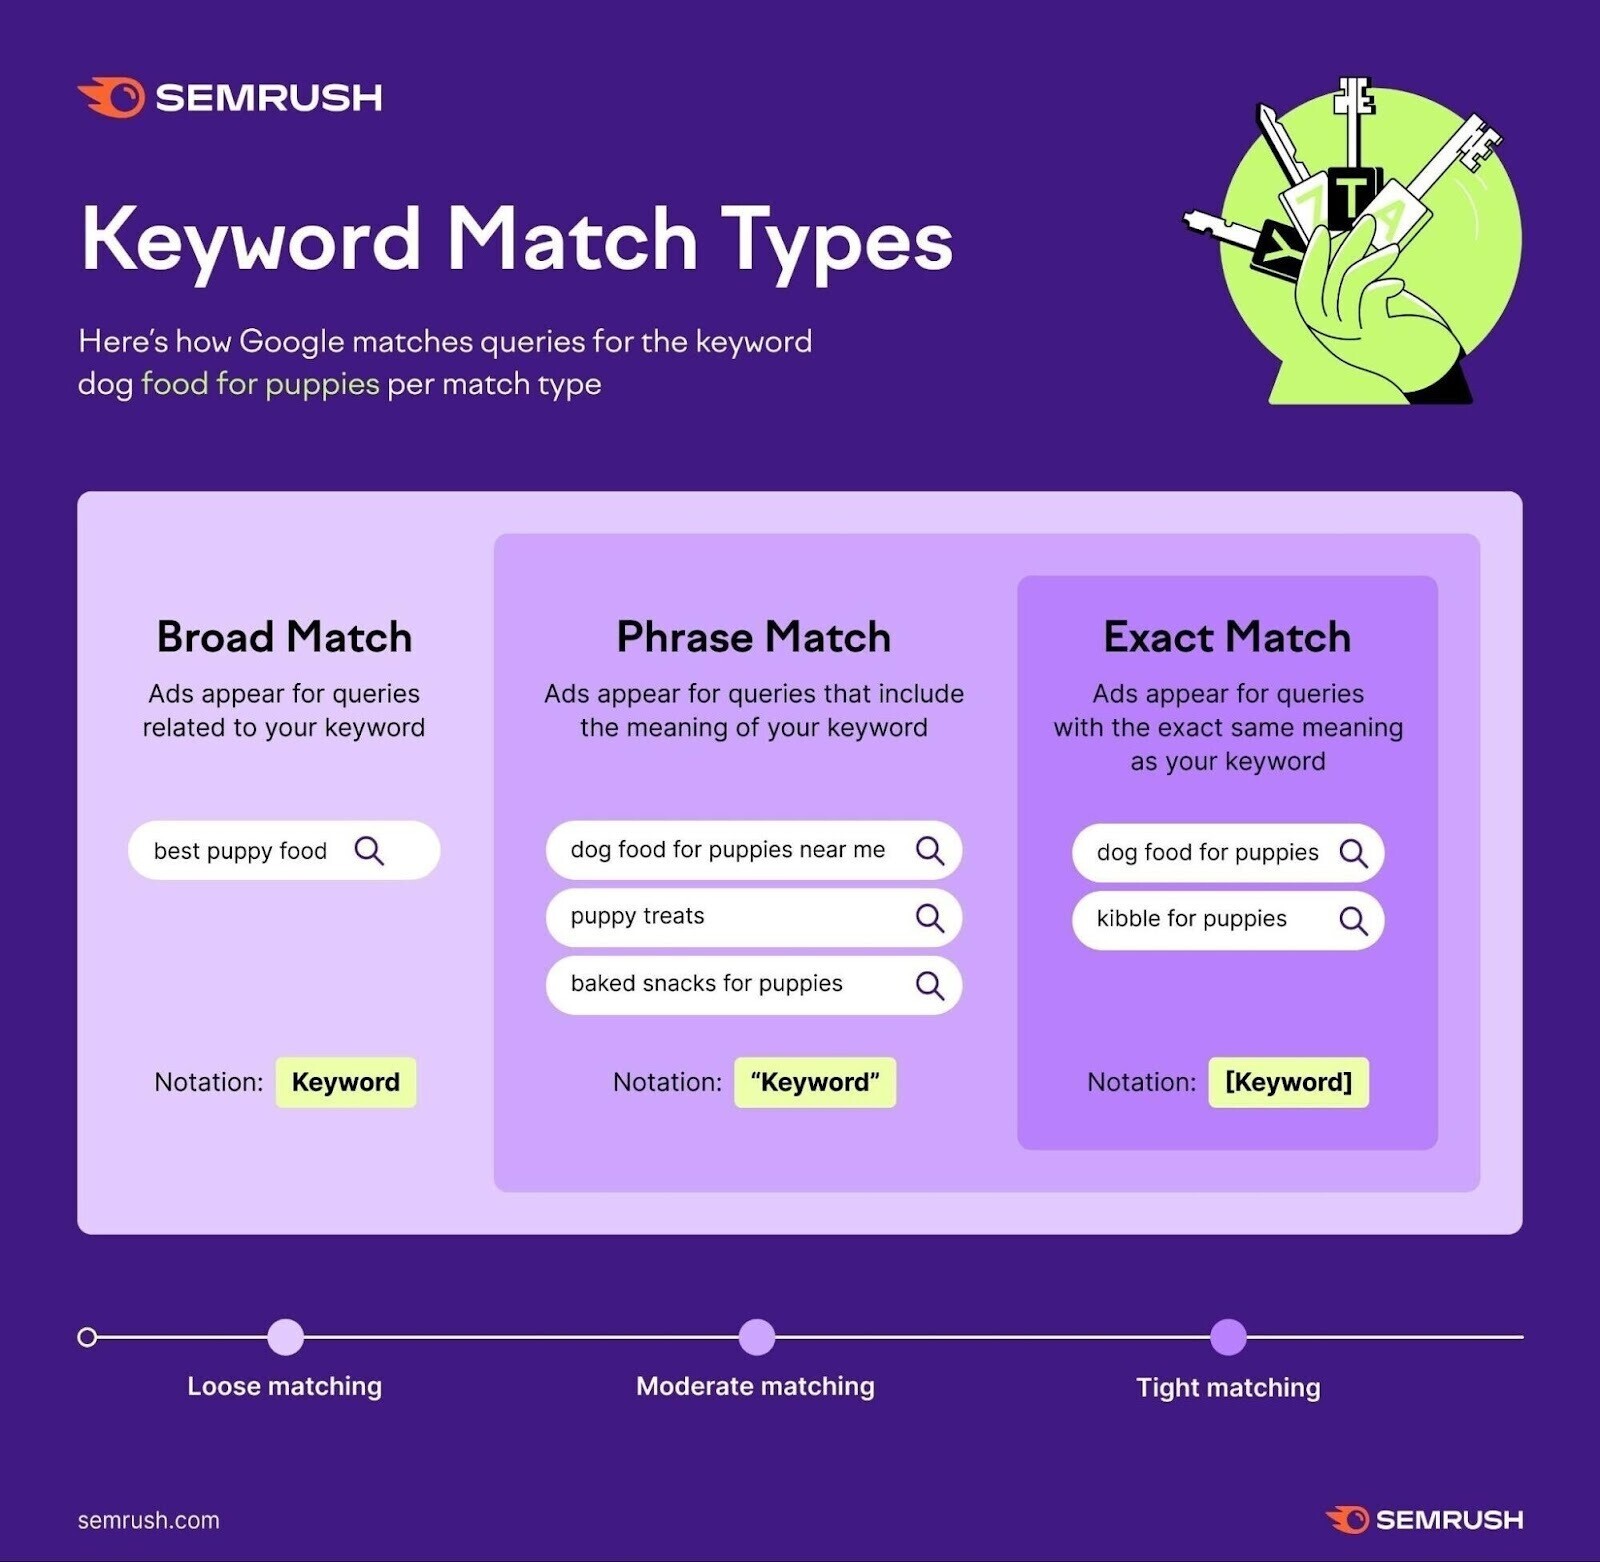 an image by Semrush explaining different keyword match types